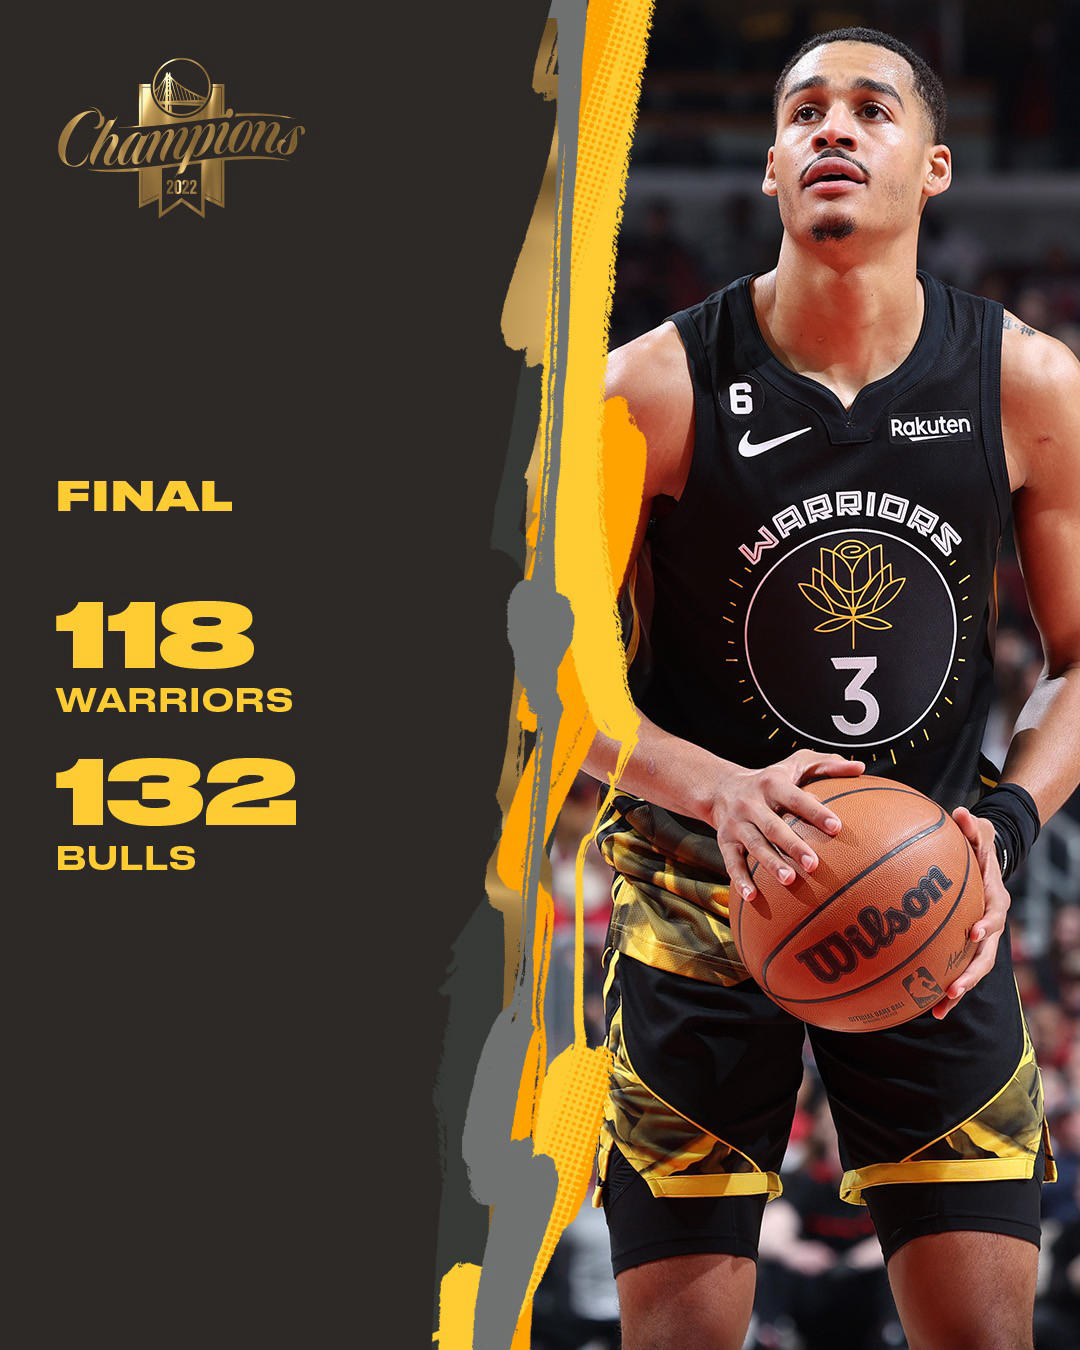 Final from Chicago